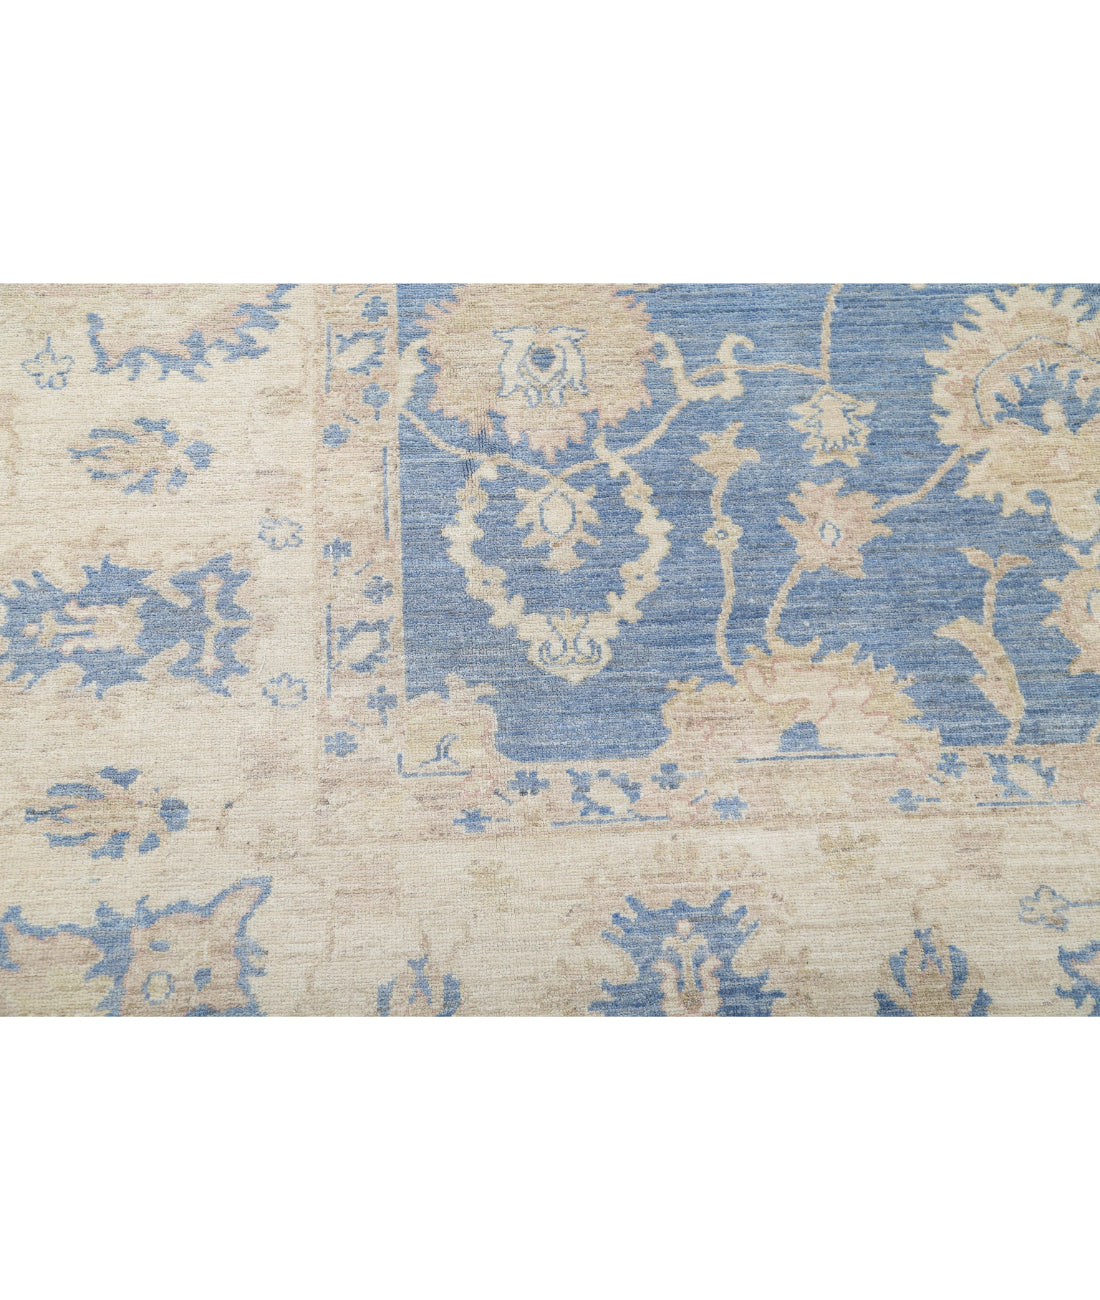 Hand Knotted Serenity Wool Rug - 8'1'' x 9'9'' 8'1'' x 9'9'' (243 X 293) / Blue / Ivory